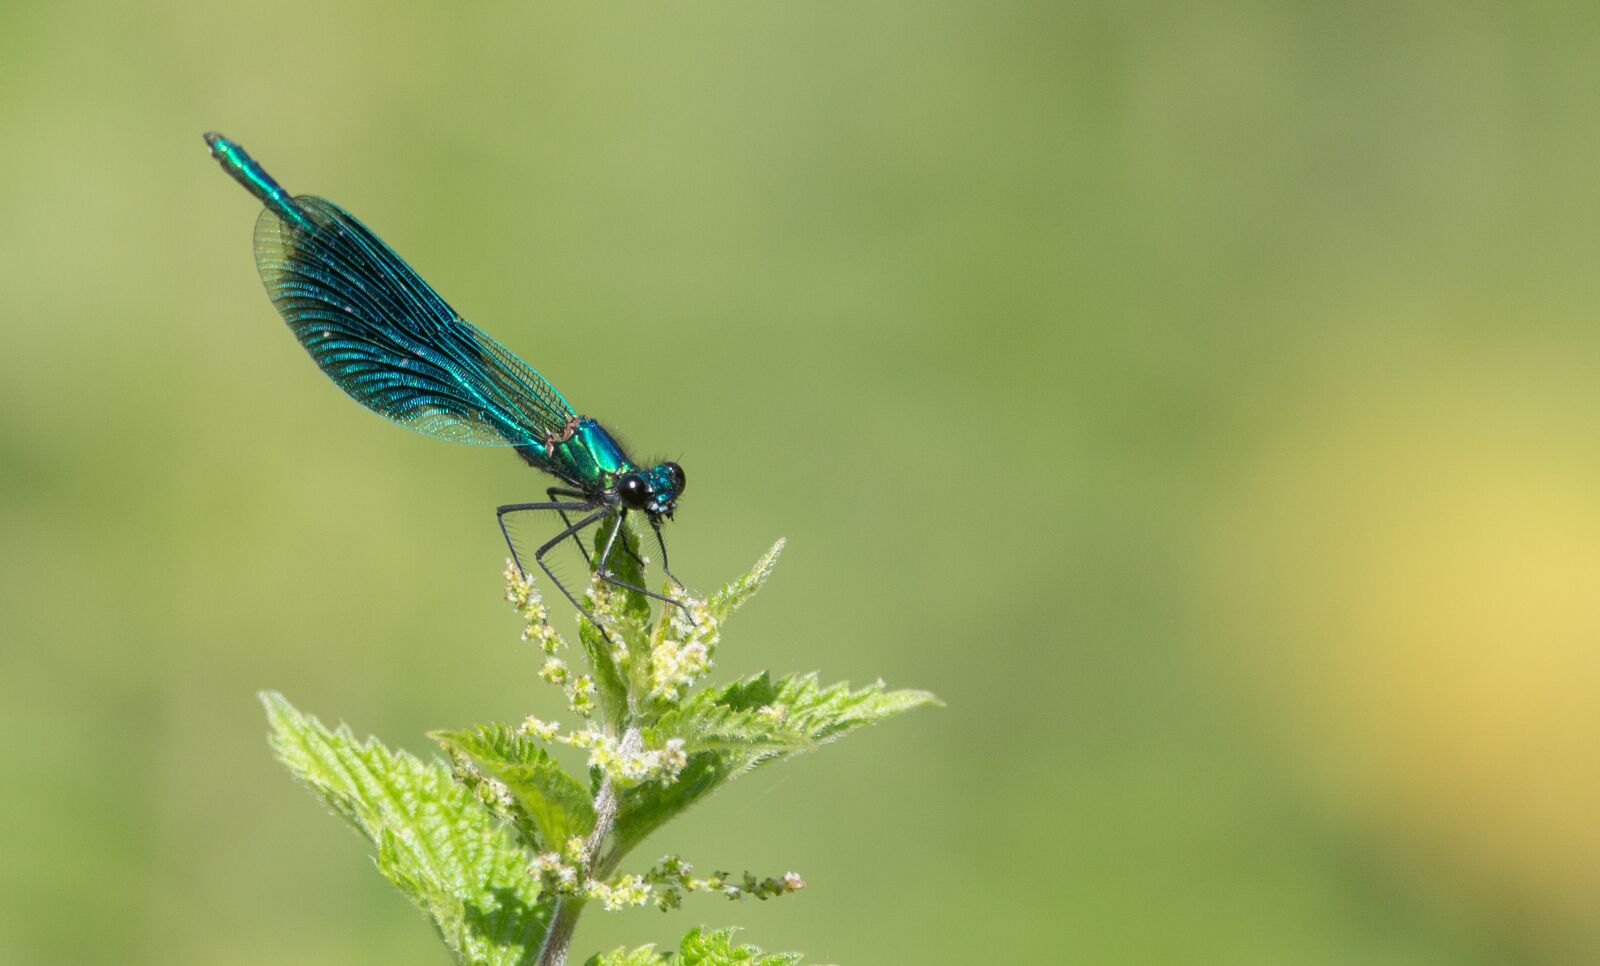 150-600mm F5-6.3 DG OS HSM | Contemporary 015 sample photo. Banded demoiselle, dragonfly, blue photography